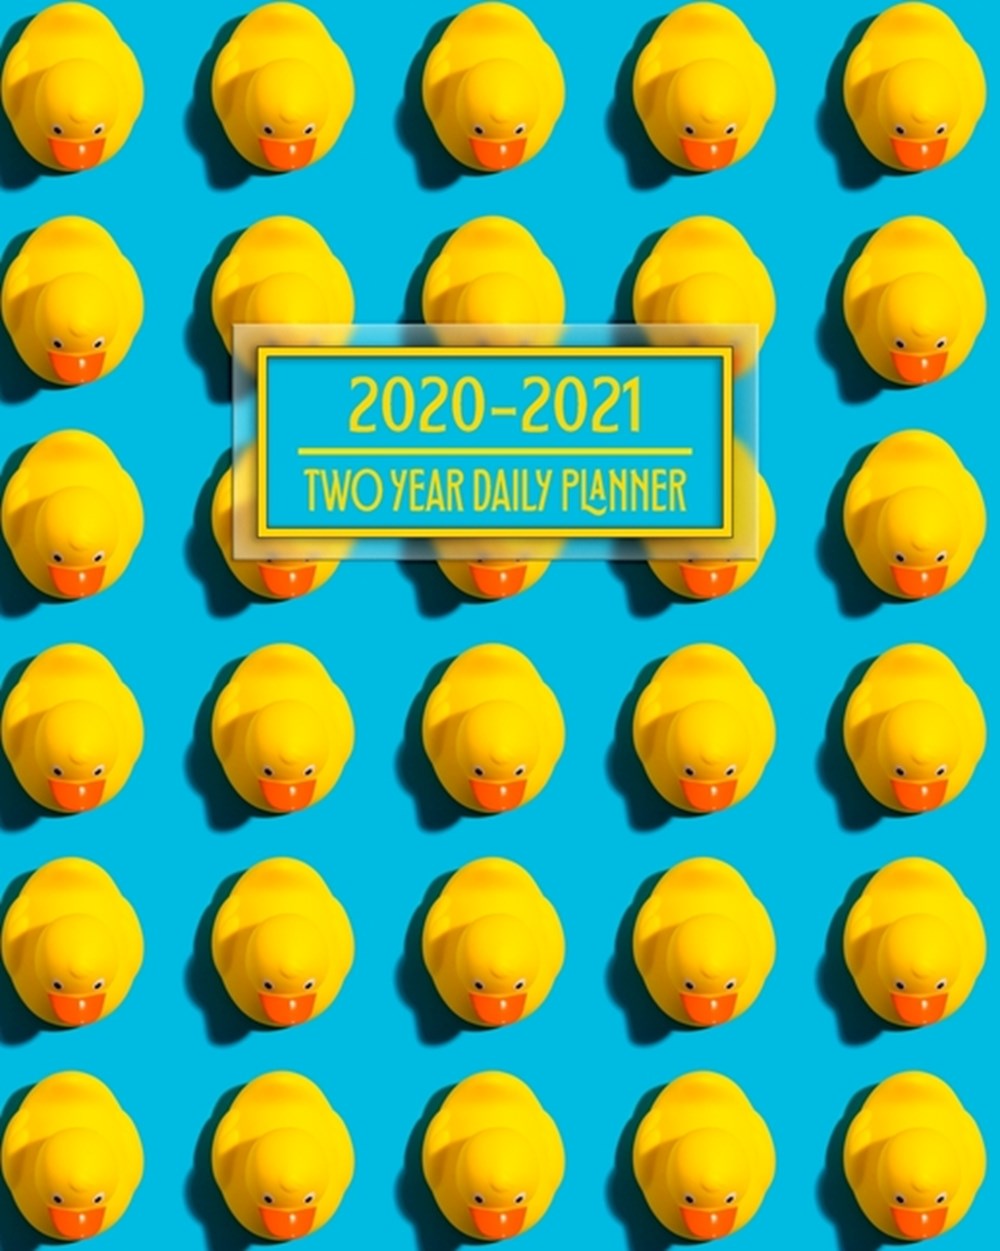 2020-2021 Two Year Daily Planner Yellow Rubber Duck Navy Great Nursery Gift for New Parents Infants 